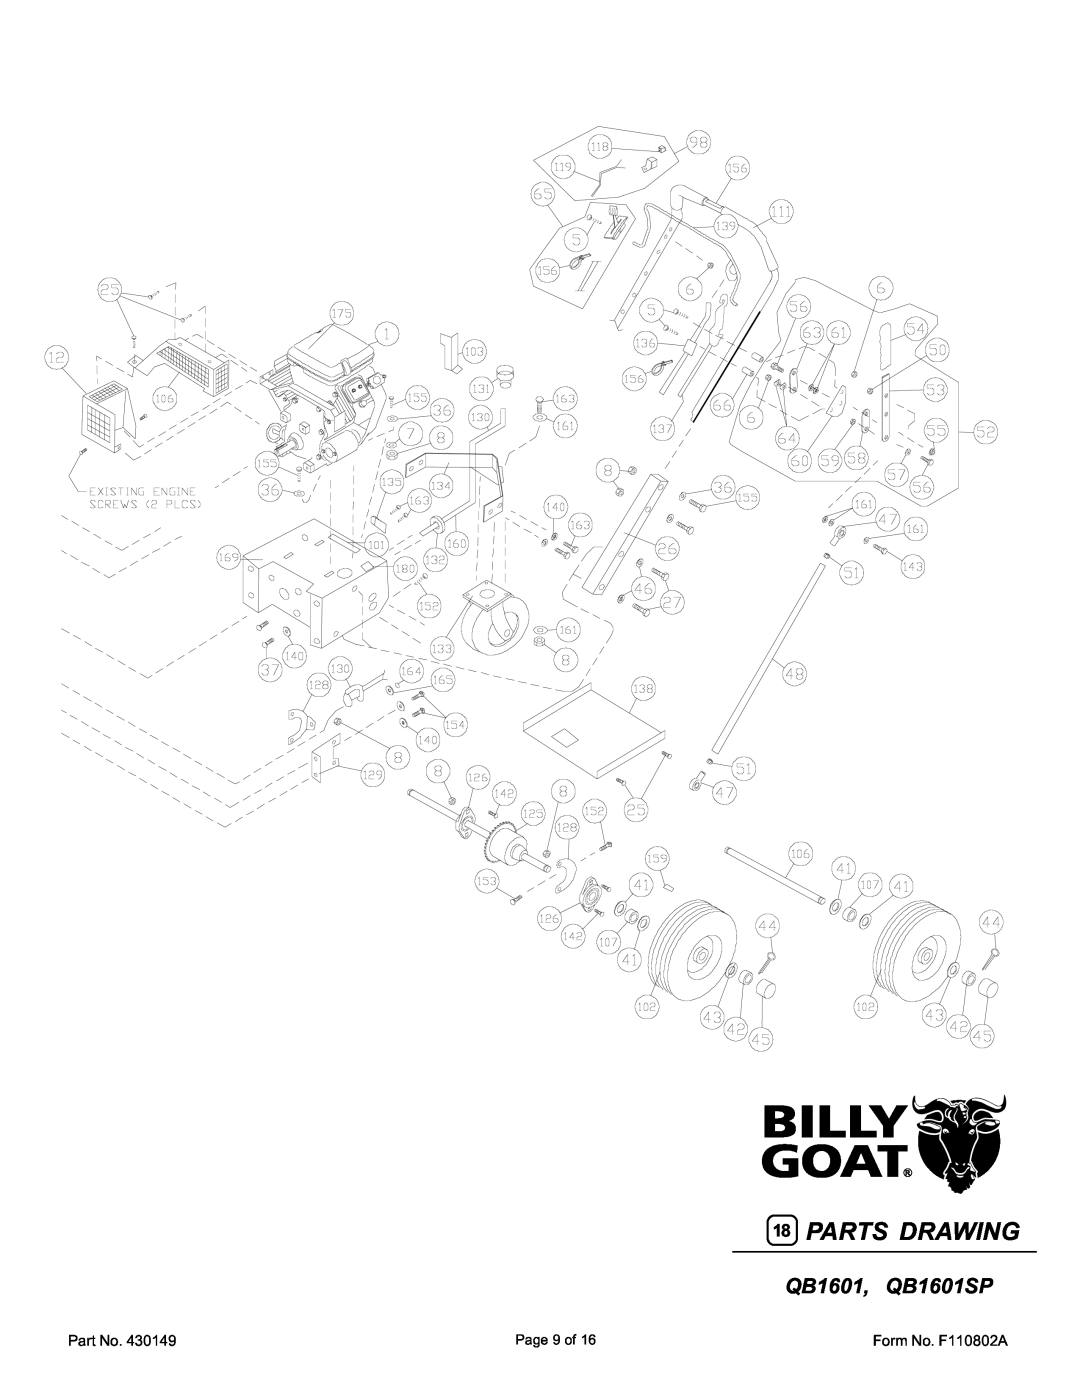 Billy Goat QB1601, QB1601SP specifications 18PARTS DRAWING, Page 9 of, Form No. F110802A 